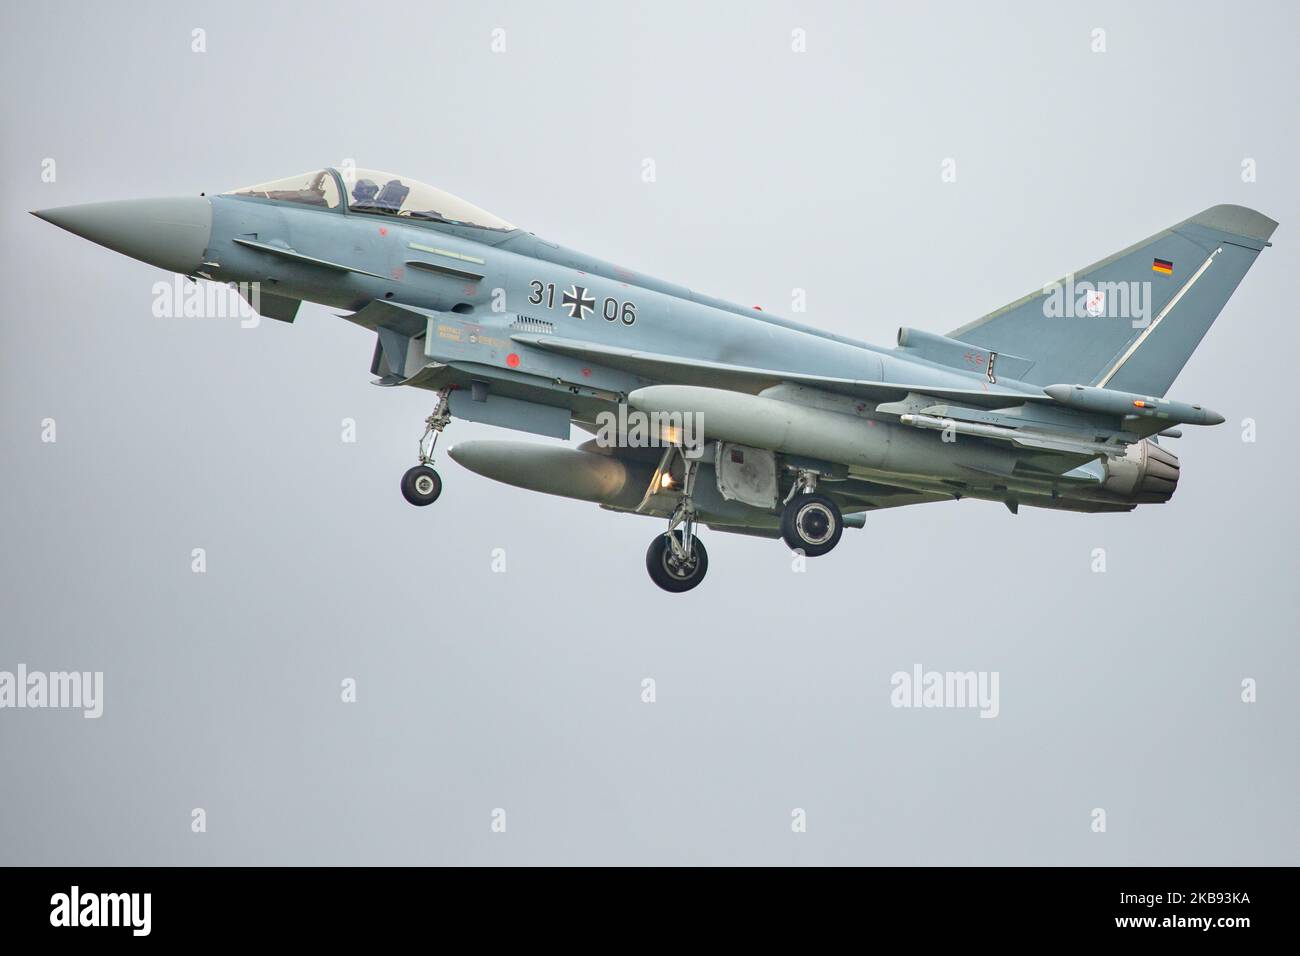 Eurofighter EF-2000 Typhoon of the German Air Force Luftwaffe with registration 31+06 ( 3106 ) as seen flying on final approach and landing at Kleine Brogel Military Air Base EBBL airport in Belgium before the International Sanicole Airshow at Sanicole Airfield Vliegveld at Hechtel - Eksel / Leopoldsburg / Beverlo Airfield EBLE a former Belgian military airfield. The plane will be in a static exhibition and flying demonstration at the air show. Kleine Brogel, Belgium - September 13, 2019 (Photo by Nicolas Economou/NurPhoto) Stock Photo